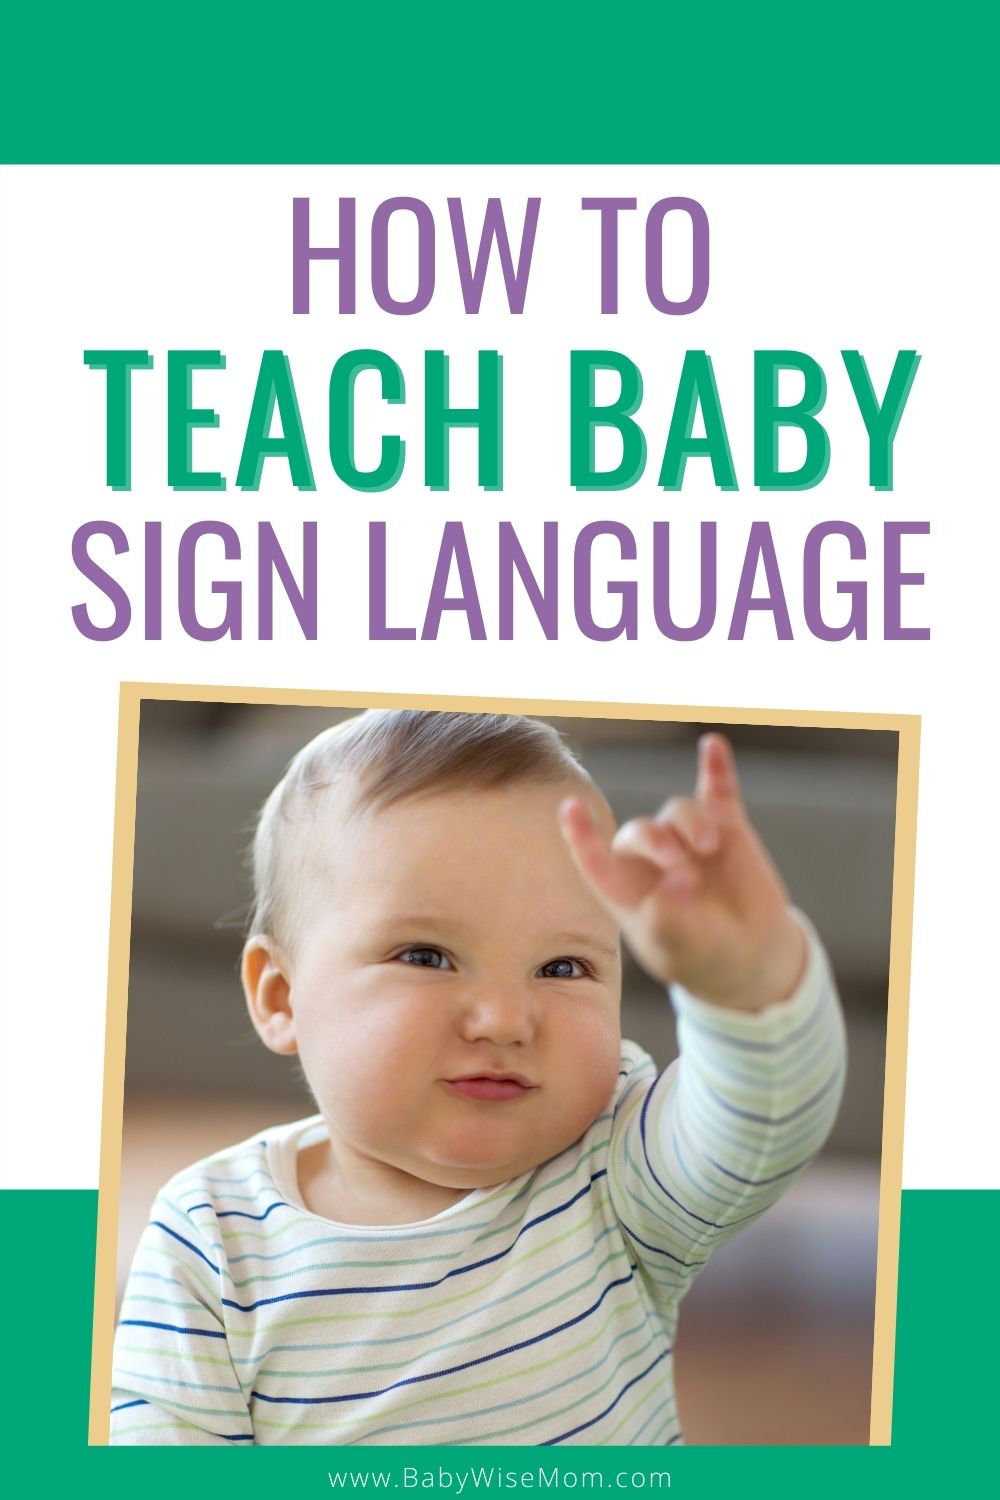 How to teach baby sign language